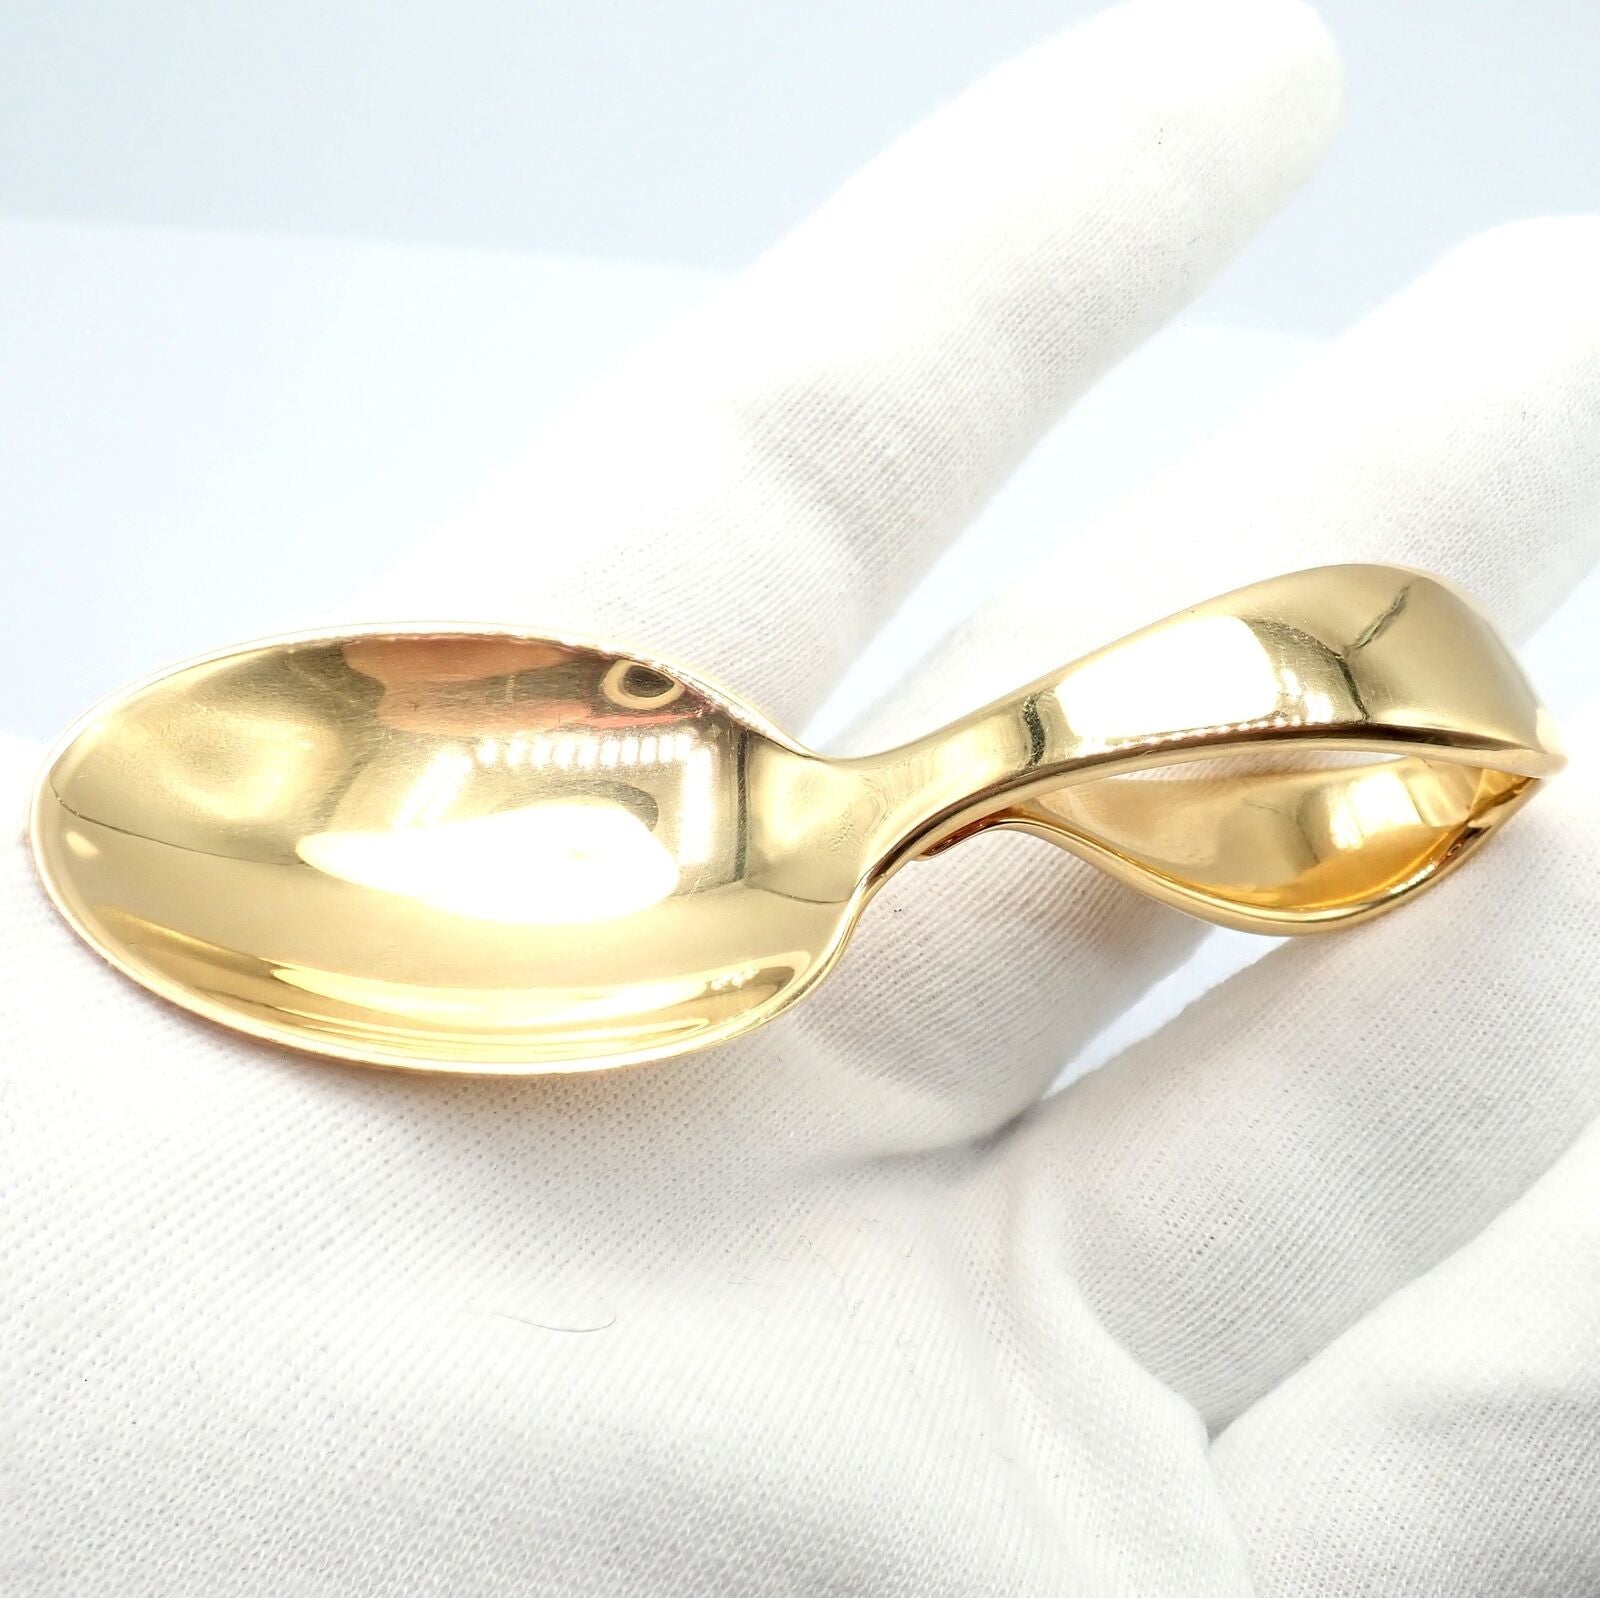 Tiffany & Co. Home & Garden:Kitchen, Dining & Bar:Flatware, Knives & Cutlery:Single Flatware Pieces Vintage Estate! Tiffany & Co. Makers 18k Yellow Gold Baby Spoon 52.8g